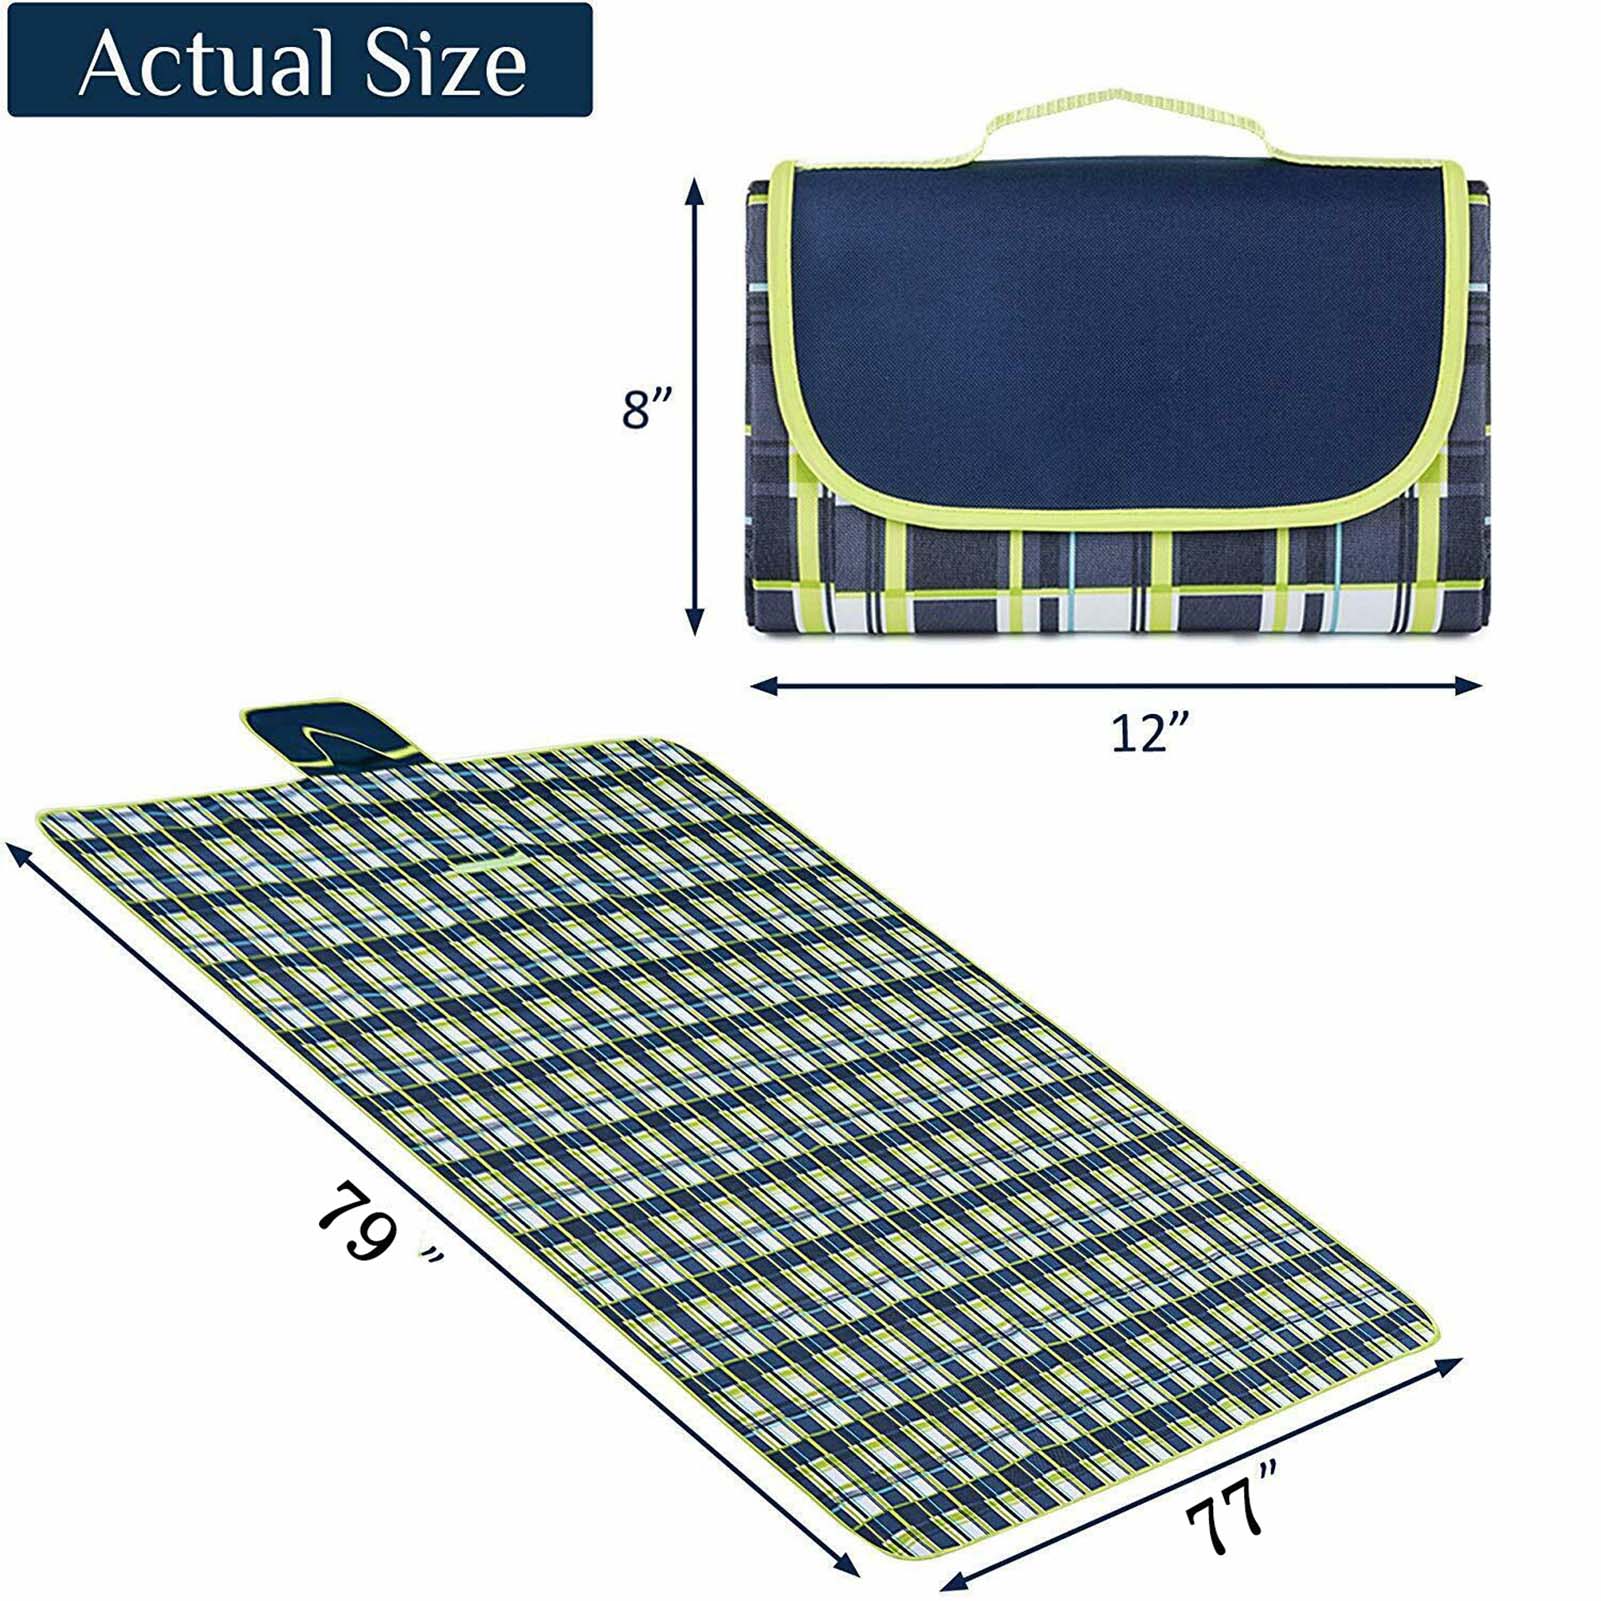 AQwzh Picnic Blanket, 77 In. x 79 In. Extra Large Beach Mat Waterproof Sand proof for 6-8 People, Oversized Foldable Camping Blankets, Machine Washable, Thick Soft for Camping, Hiking, Travel (Blue) - image 2 of 7